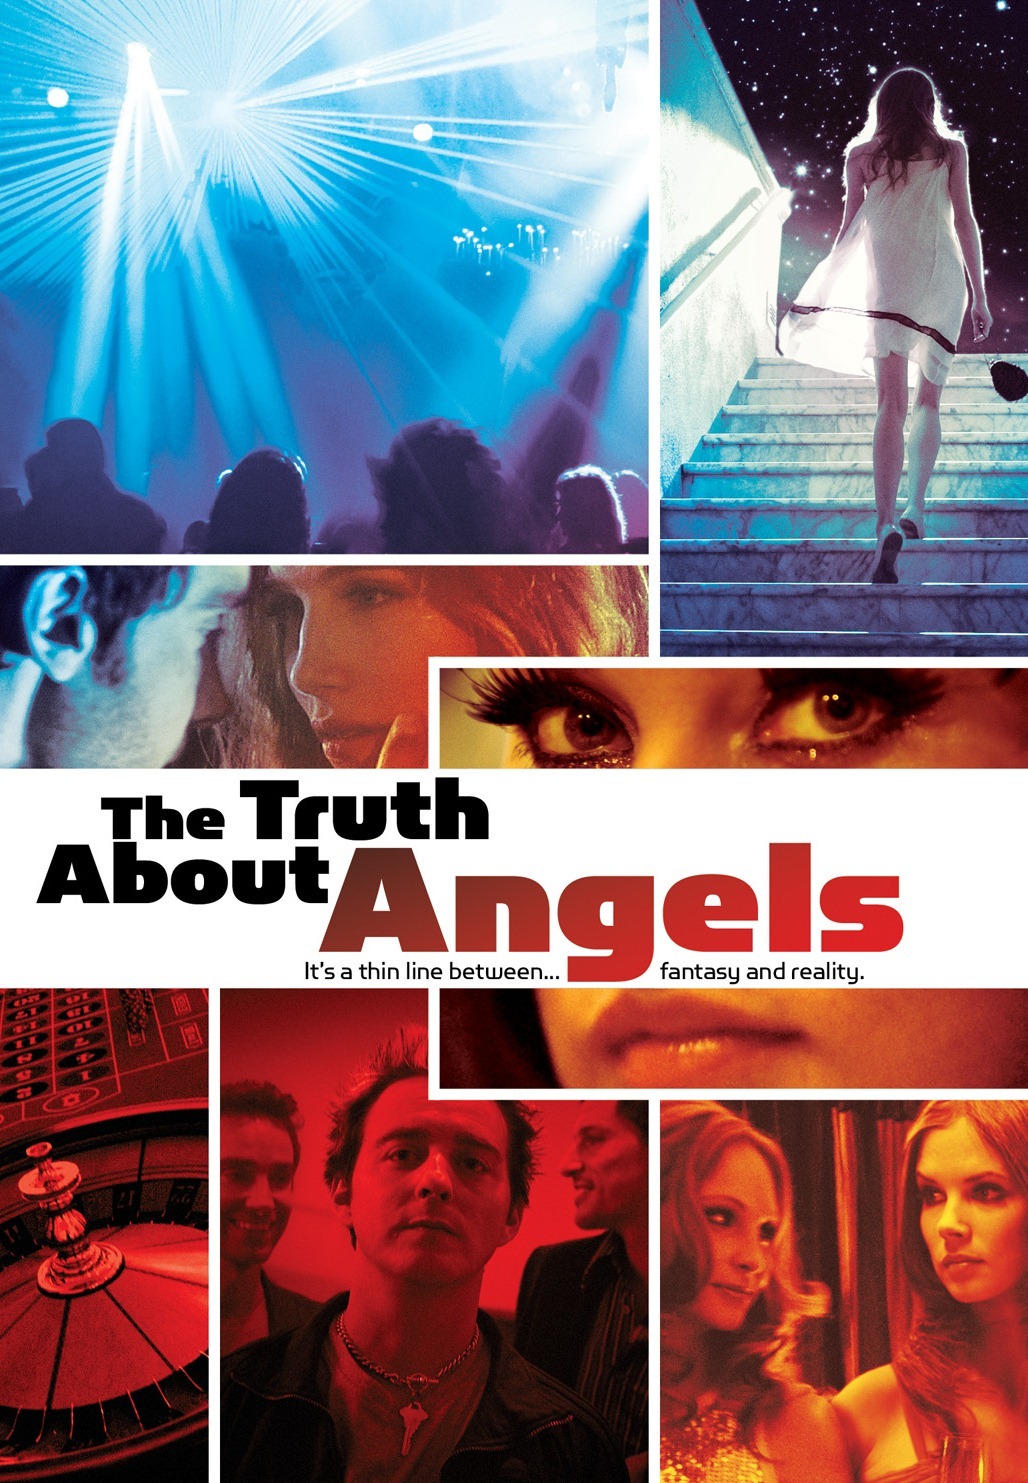 The Truth About Angels (2011) Nacktszenen